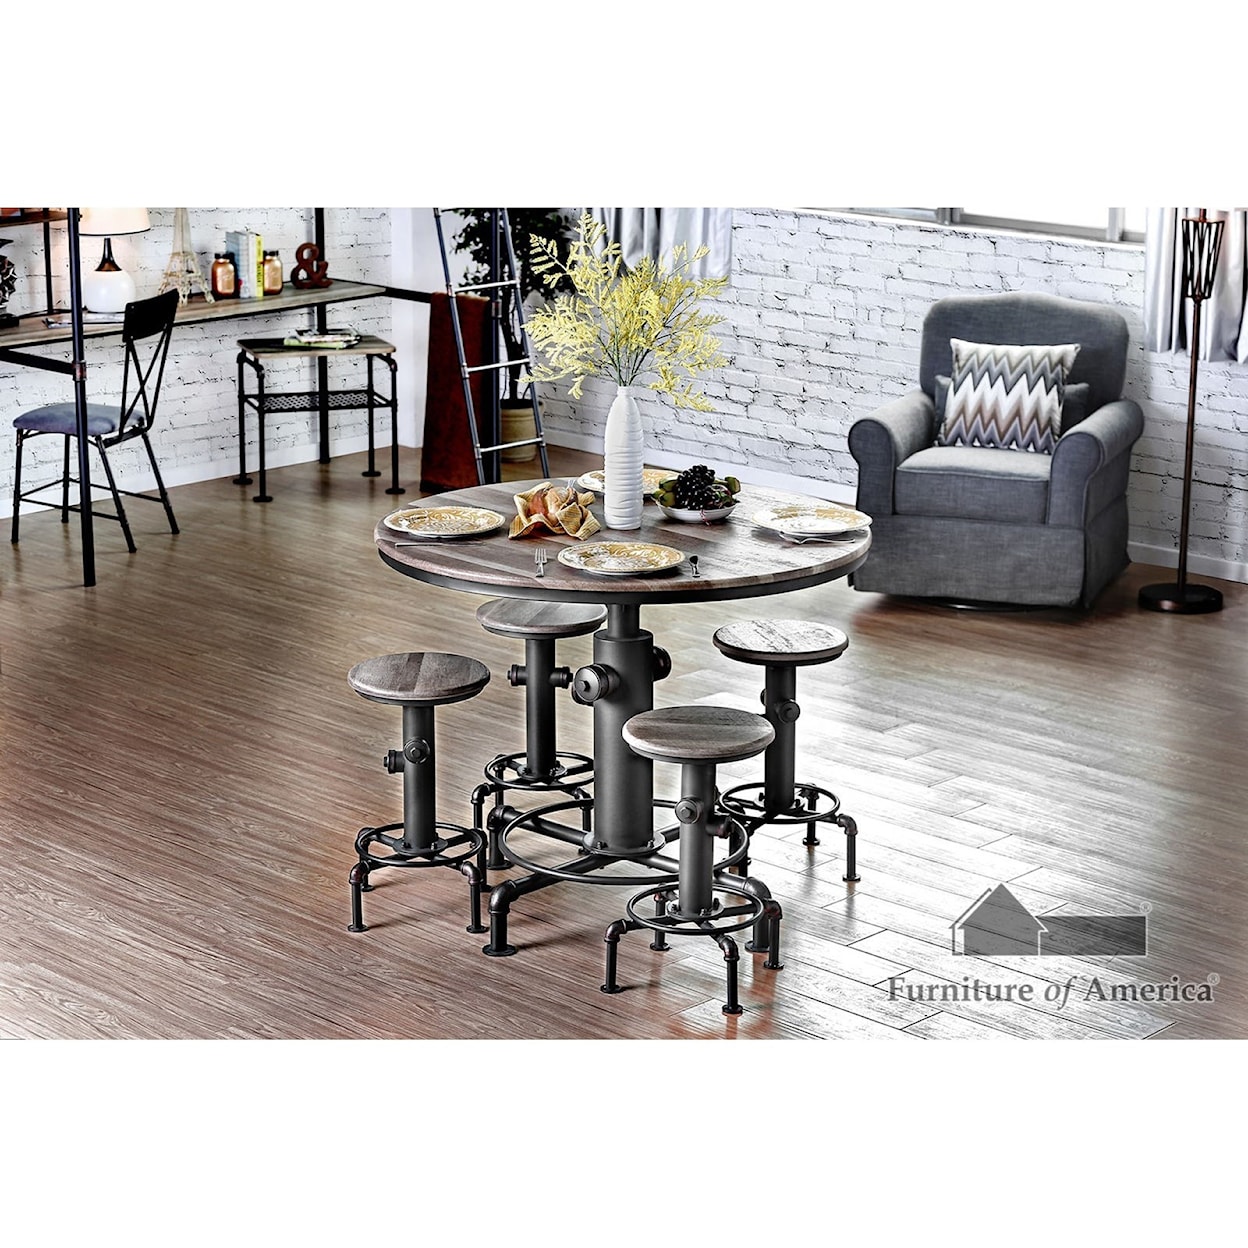 Furniture of America Foskey Table + 4 Chairs